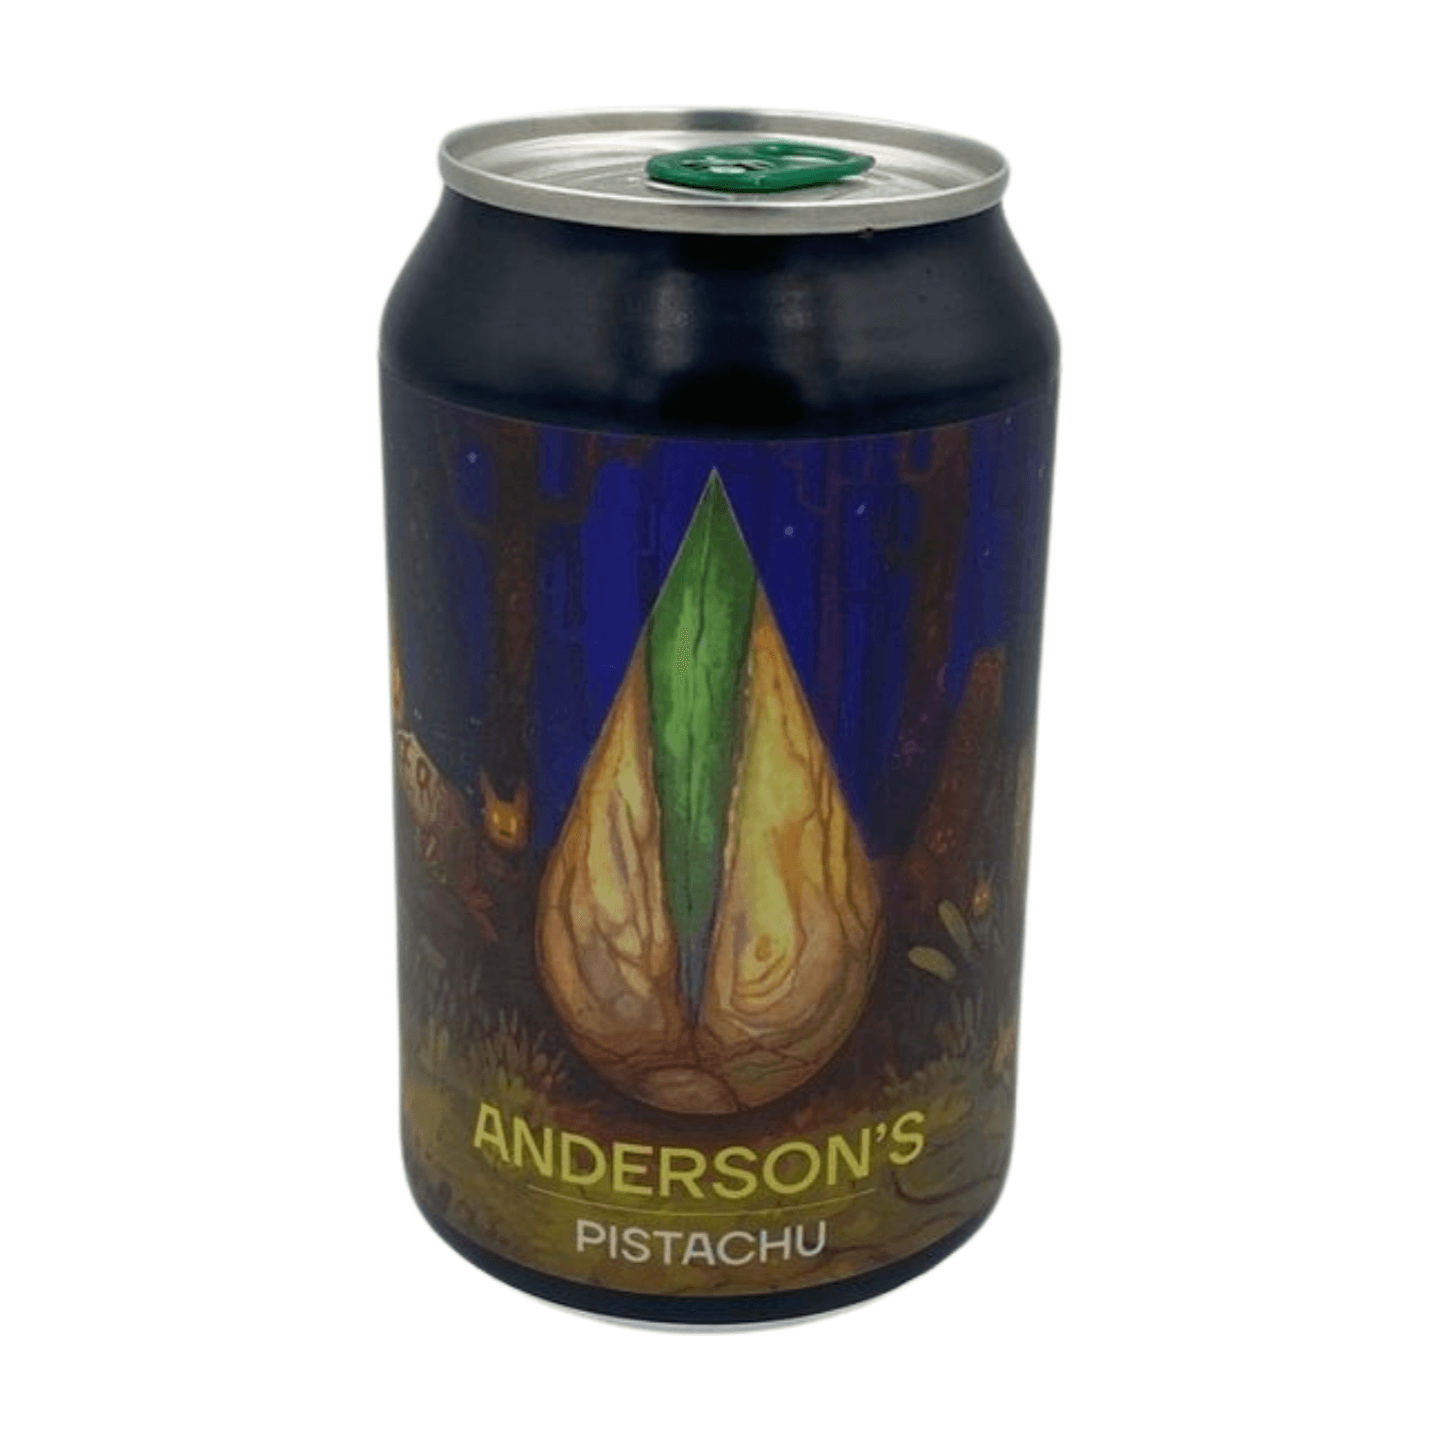 Anderson's Pistachu | Pastry Stout